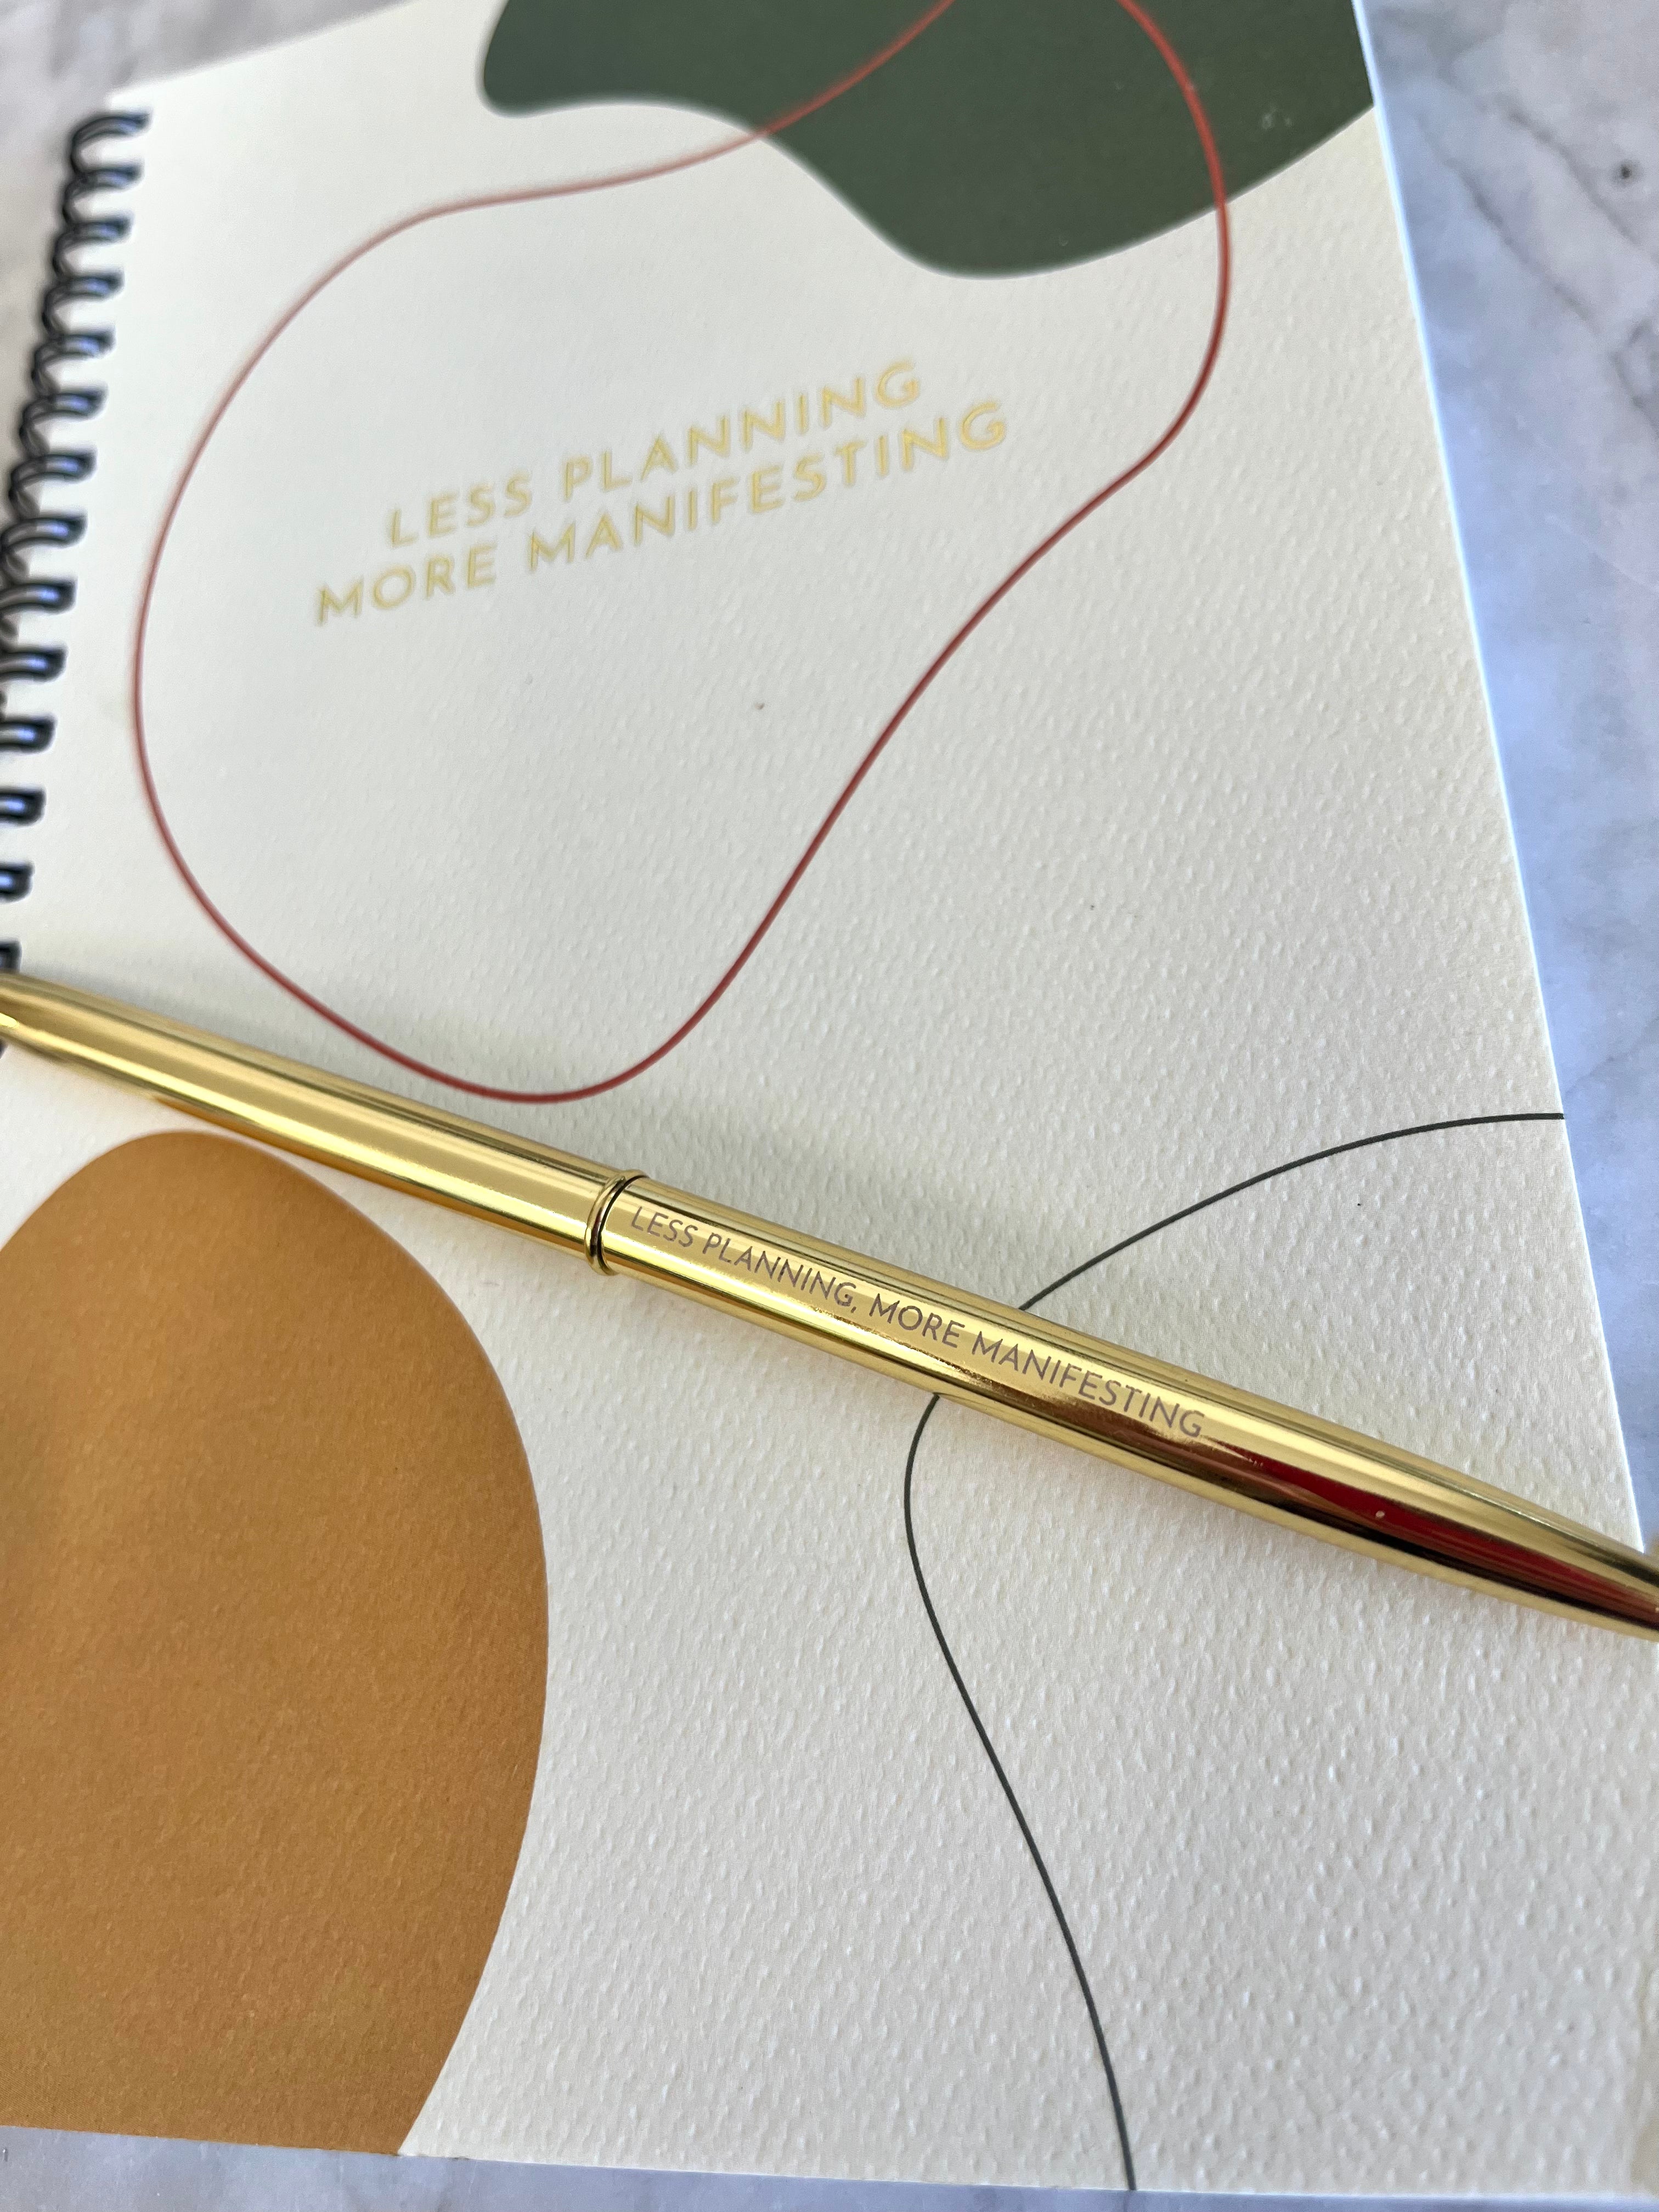 Intentions and Manifesting Journal